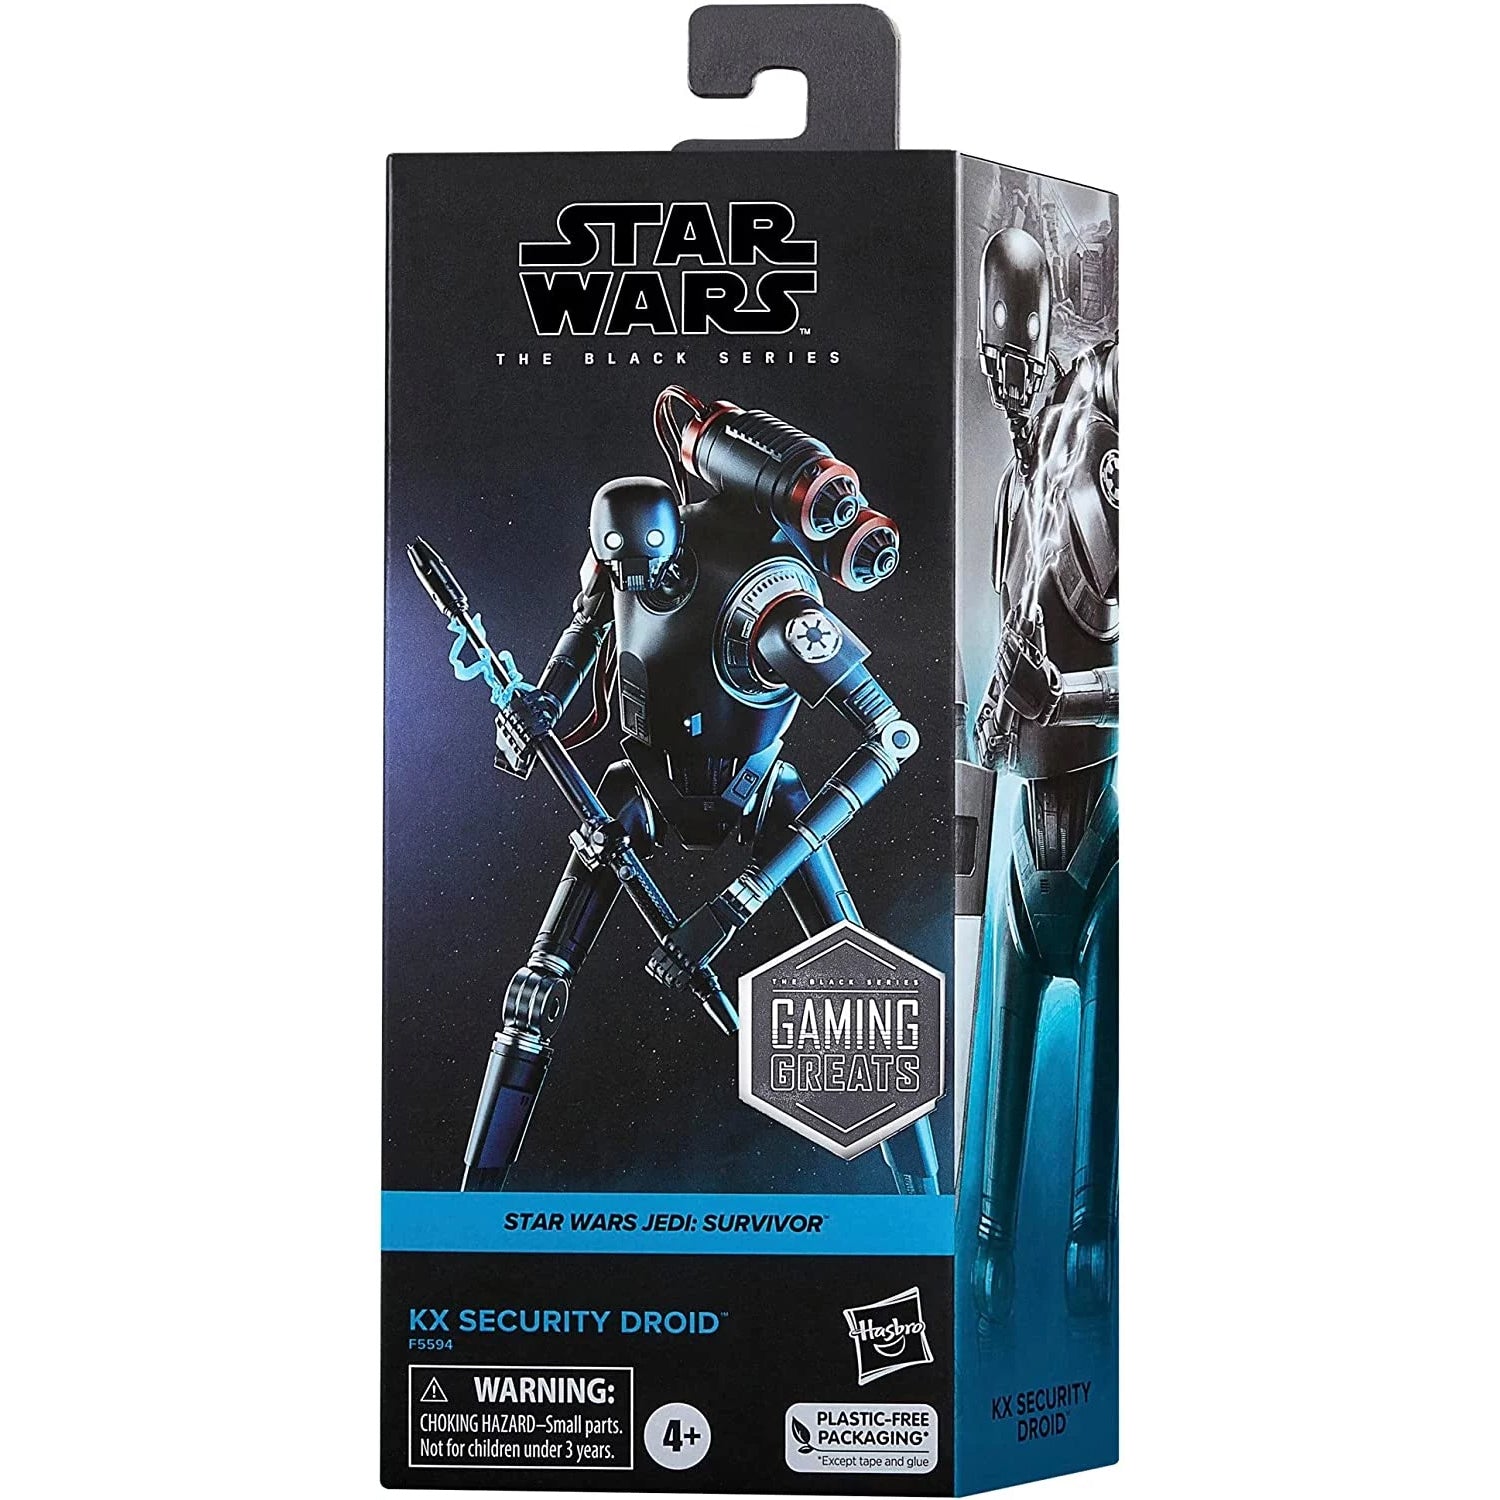 Star Wars Black Series: Gaming Greats 6 Inch Action Figure - KX Security Droid